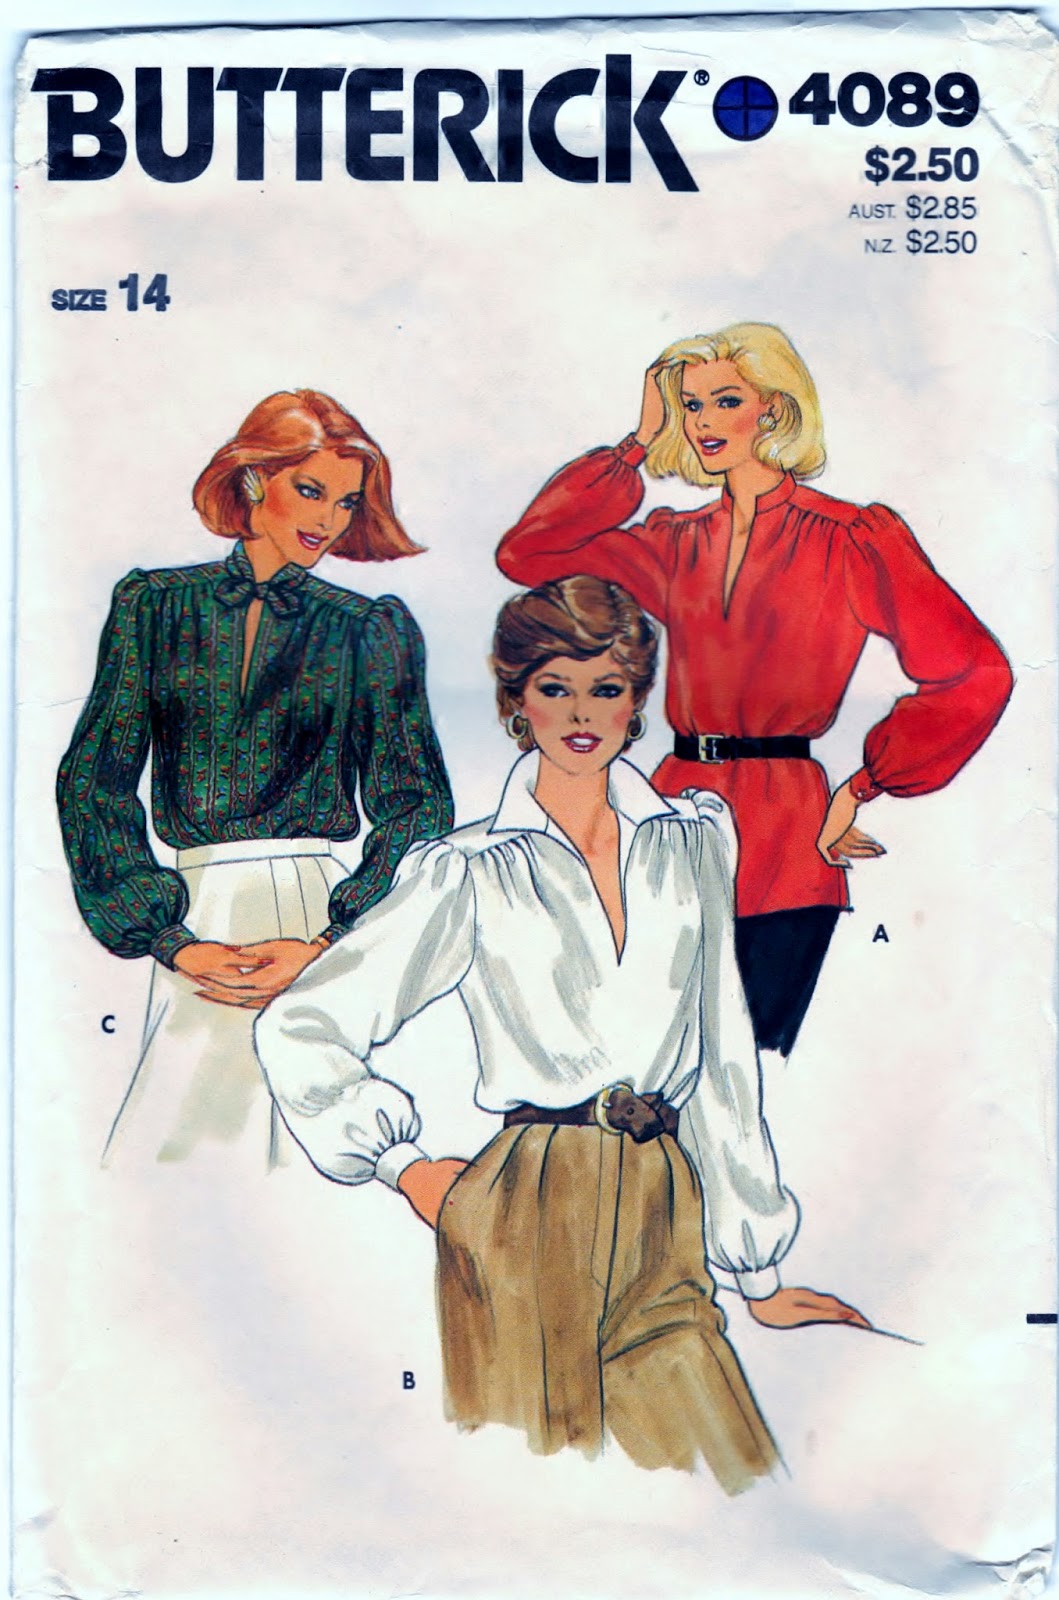 https://www.etsy.com/listing/222688676/vintage-butterick-4089-sewing-craft?ref=shop_home_active_1